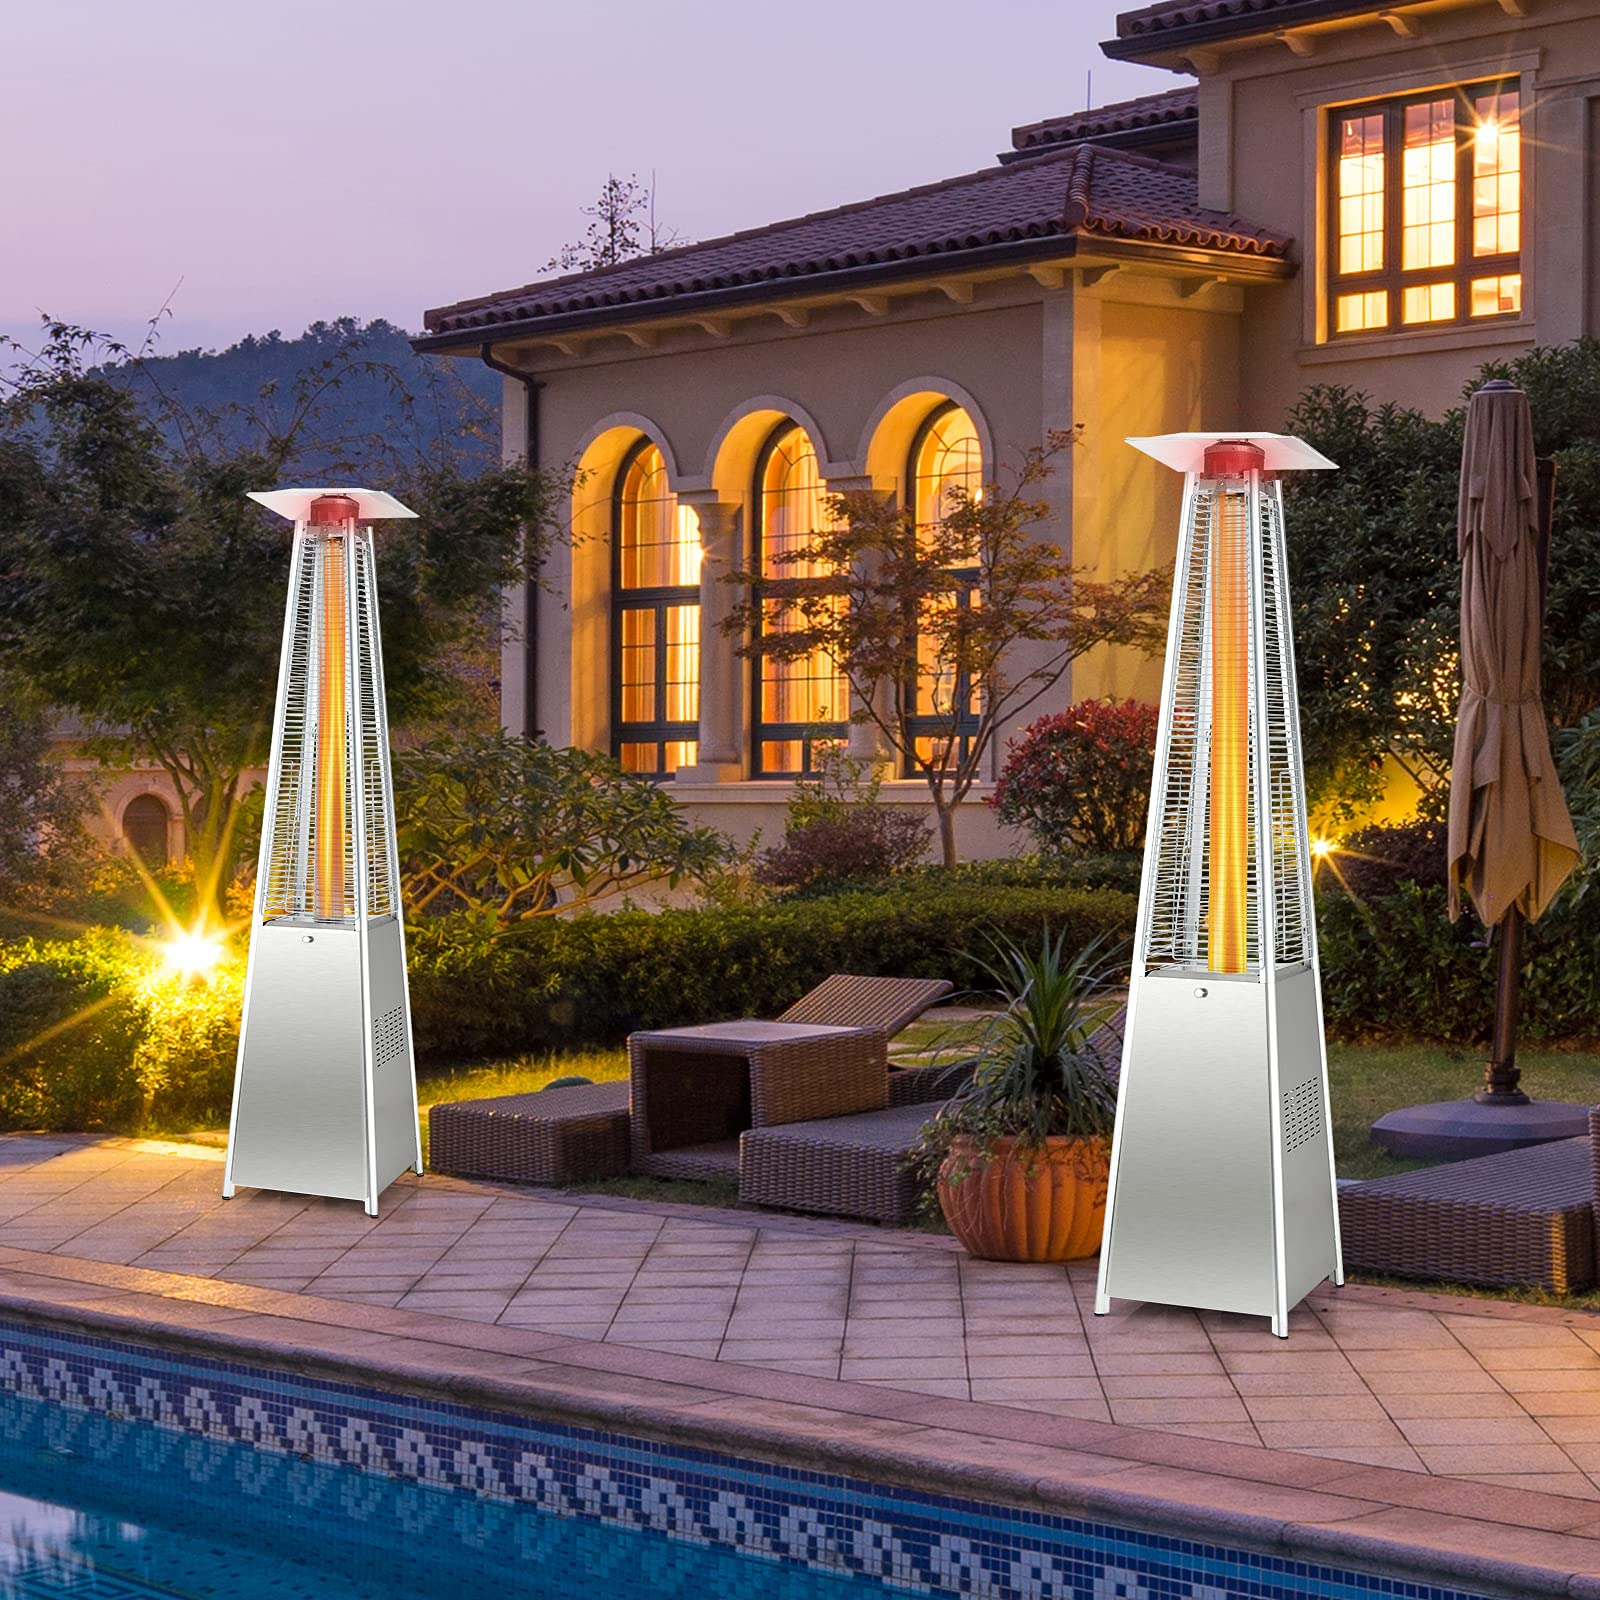 Giantex Outdoor Propane Patio Heaters, 42,000 BTU Pyramid Style Gas Porch and Deck Heater w/Dancing Flame